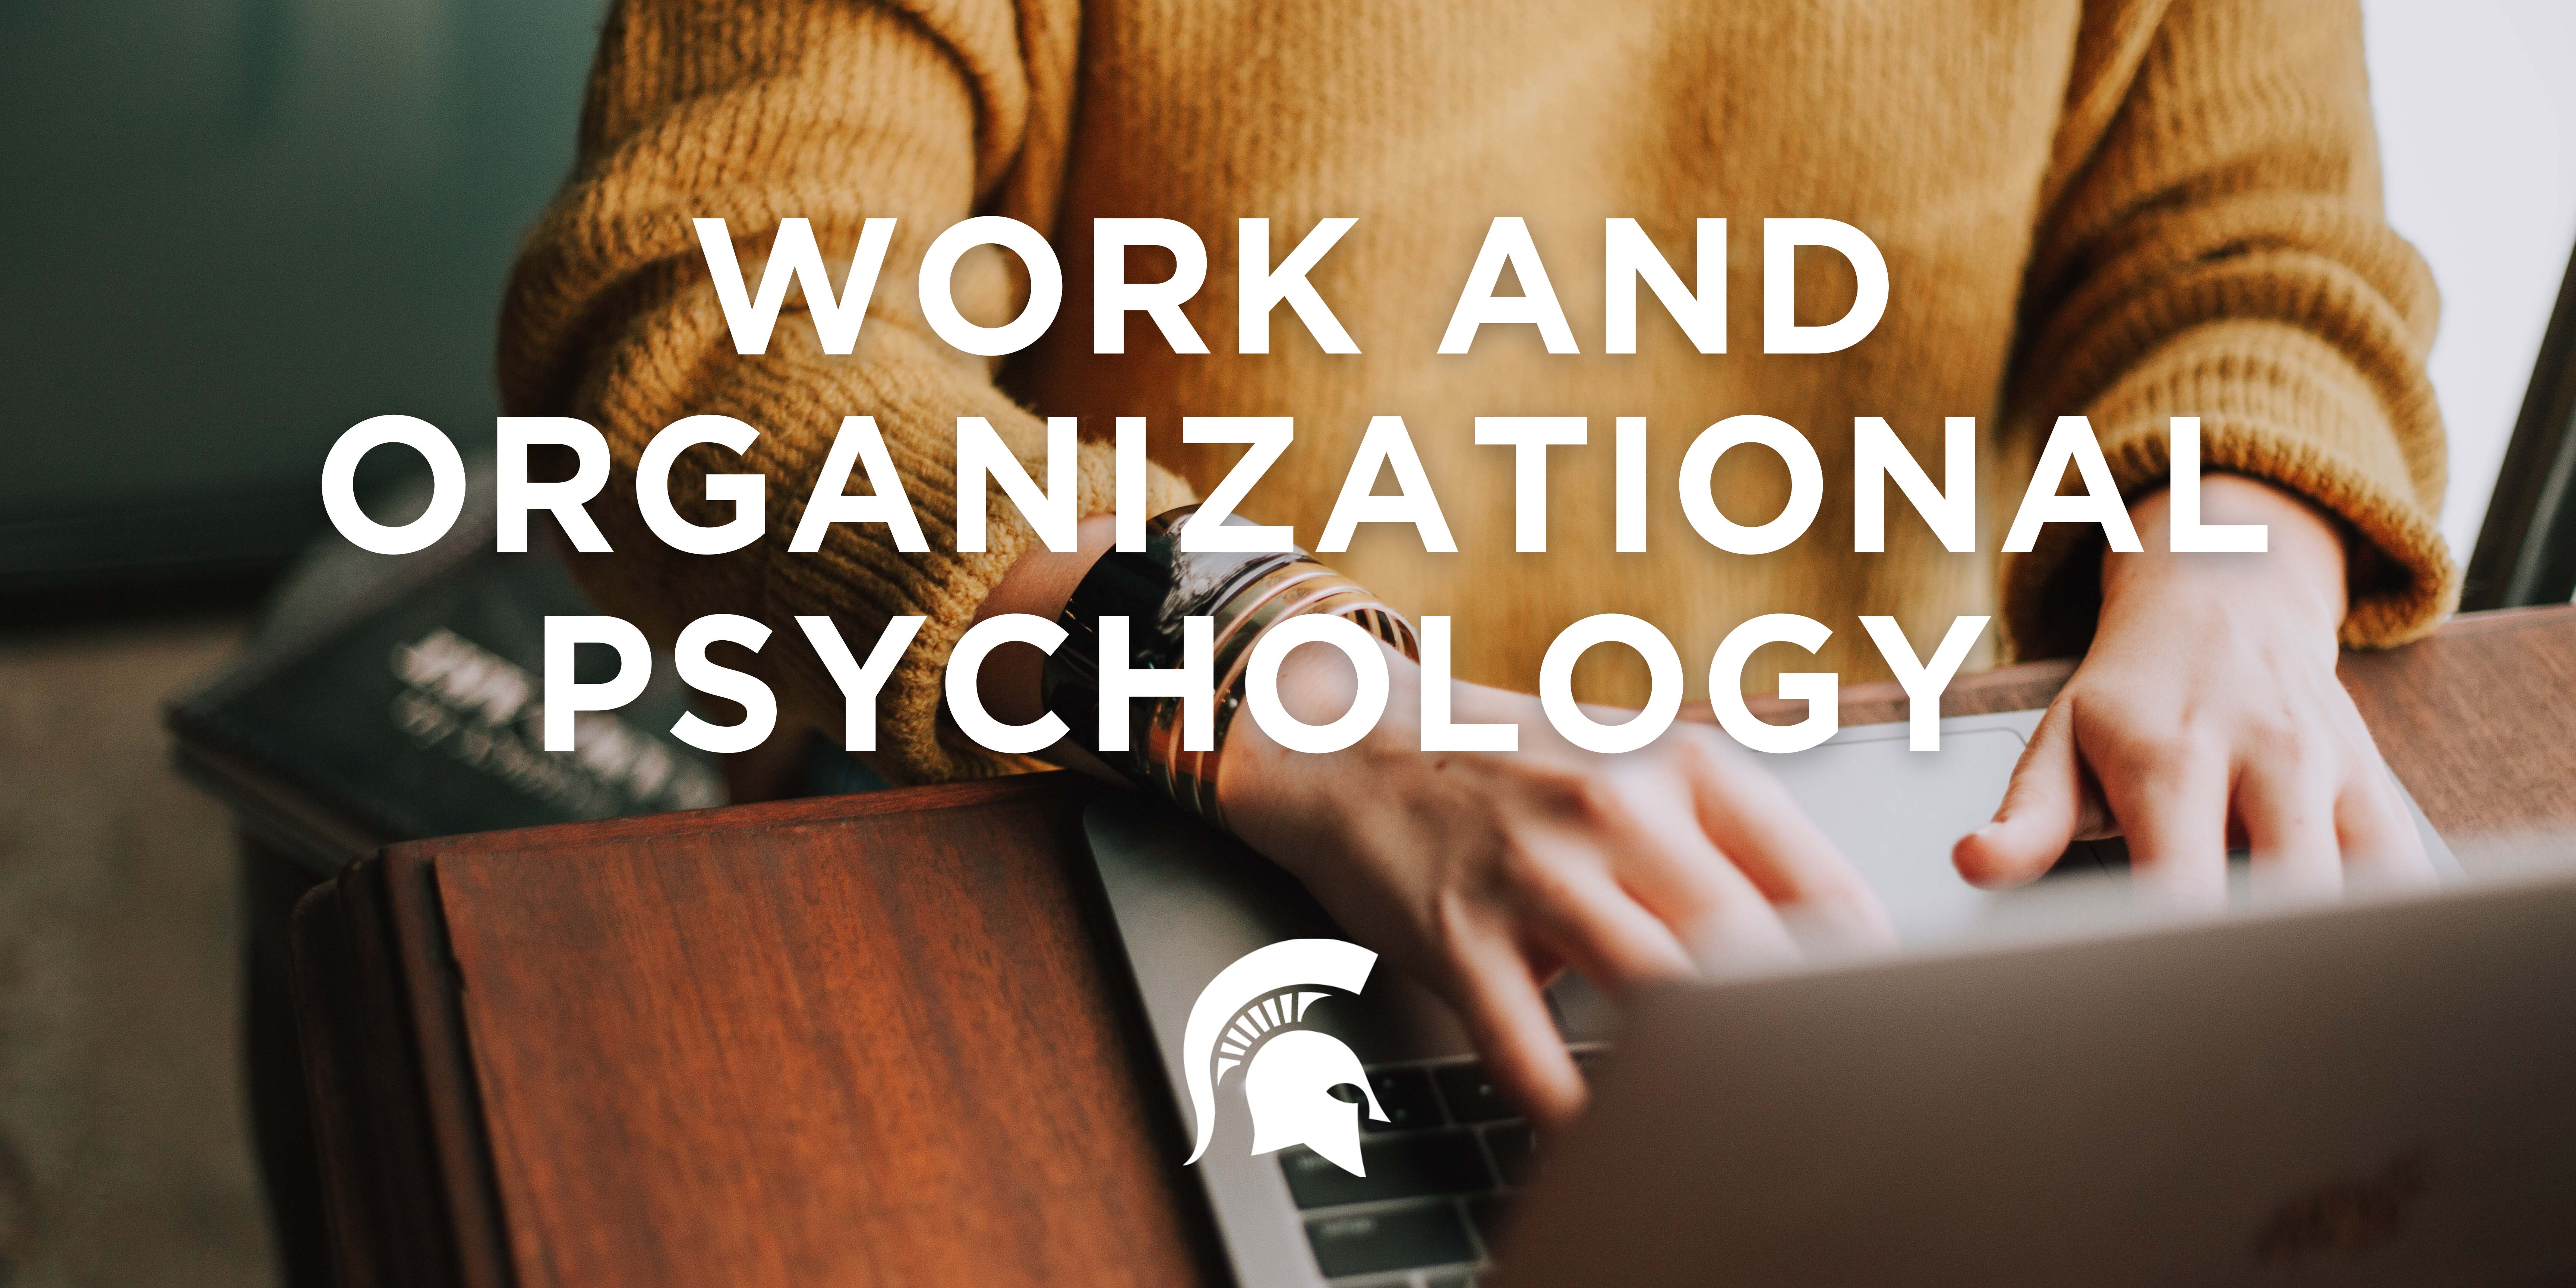 A torso and hands are shown in a cropped photo. The hands are on the keyboard of a laptop.  The person wears a dark yellow sweater. The graphic has the Spartan head and says "Work and Organizational Psychology."